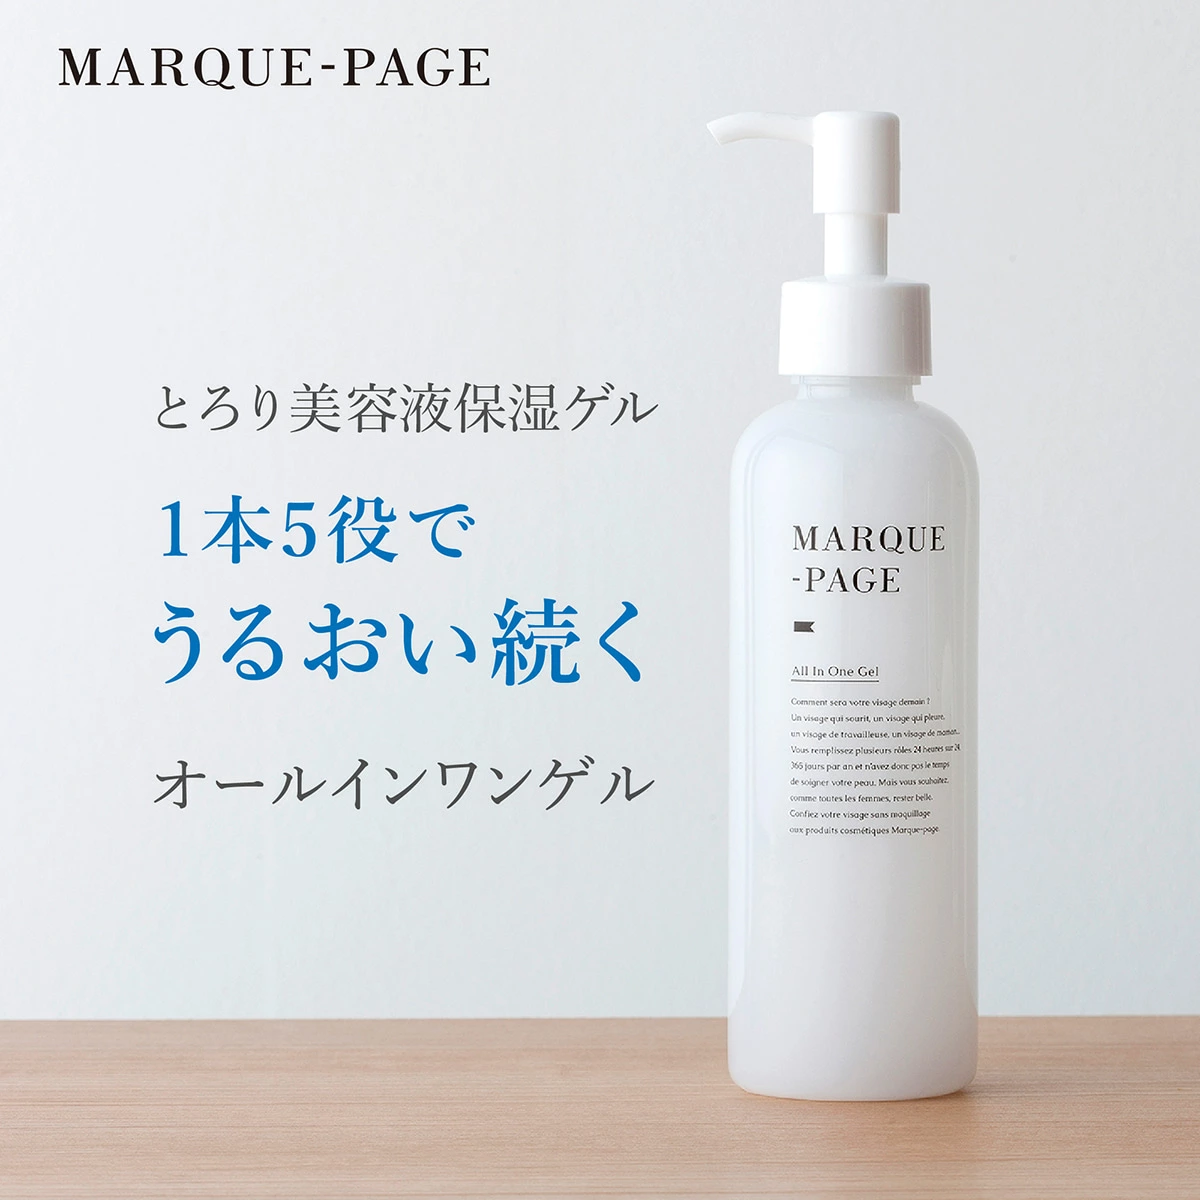 MARQUE-PAGE(マルクパージュ) オールインワンゲルの商品画像サムネ1 